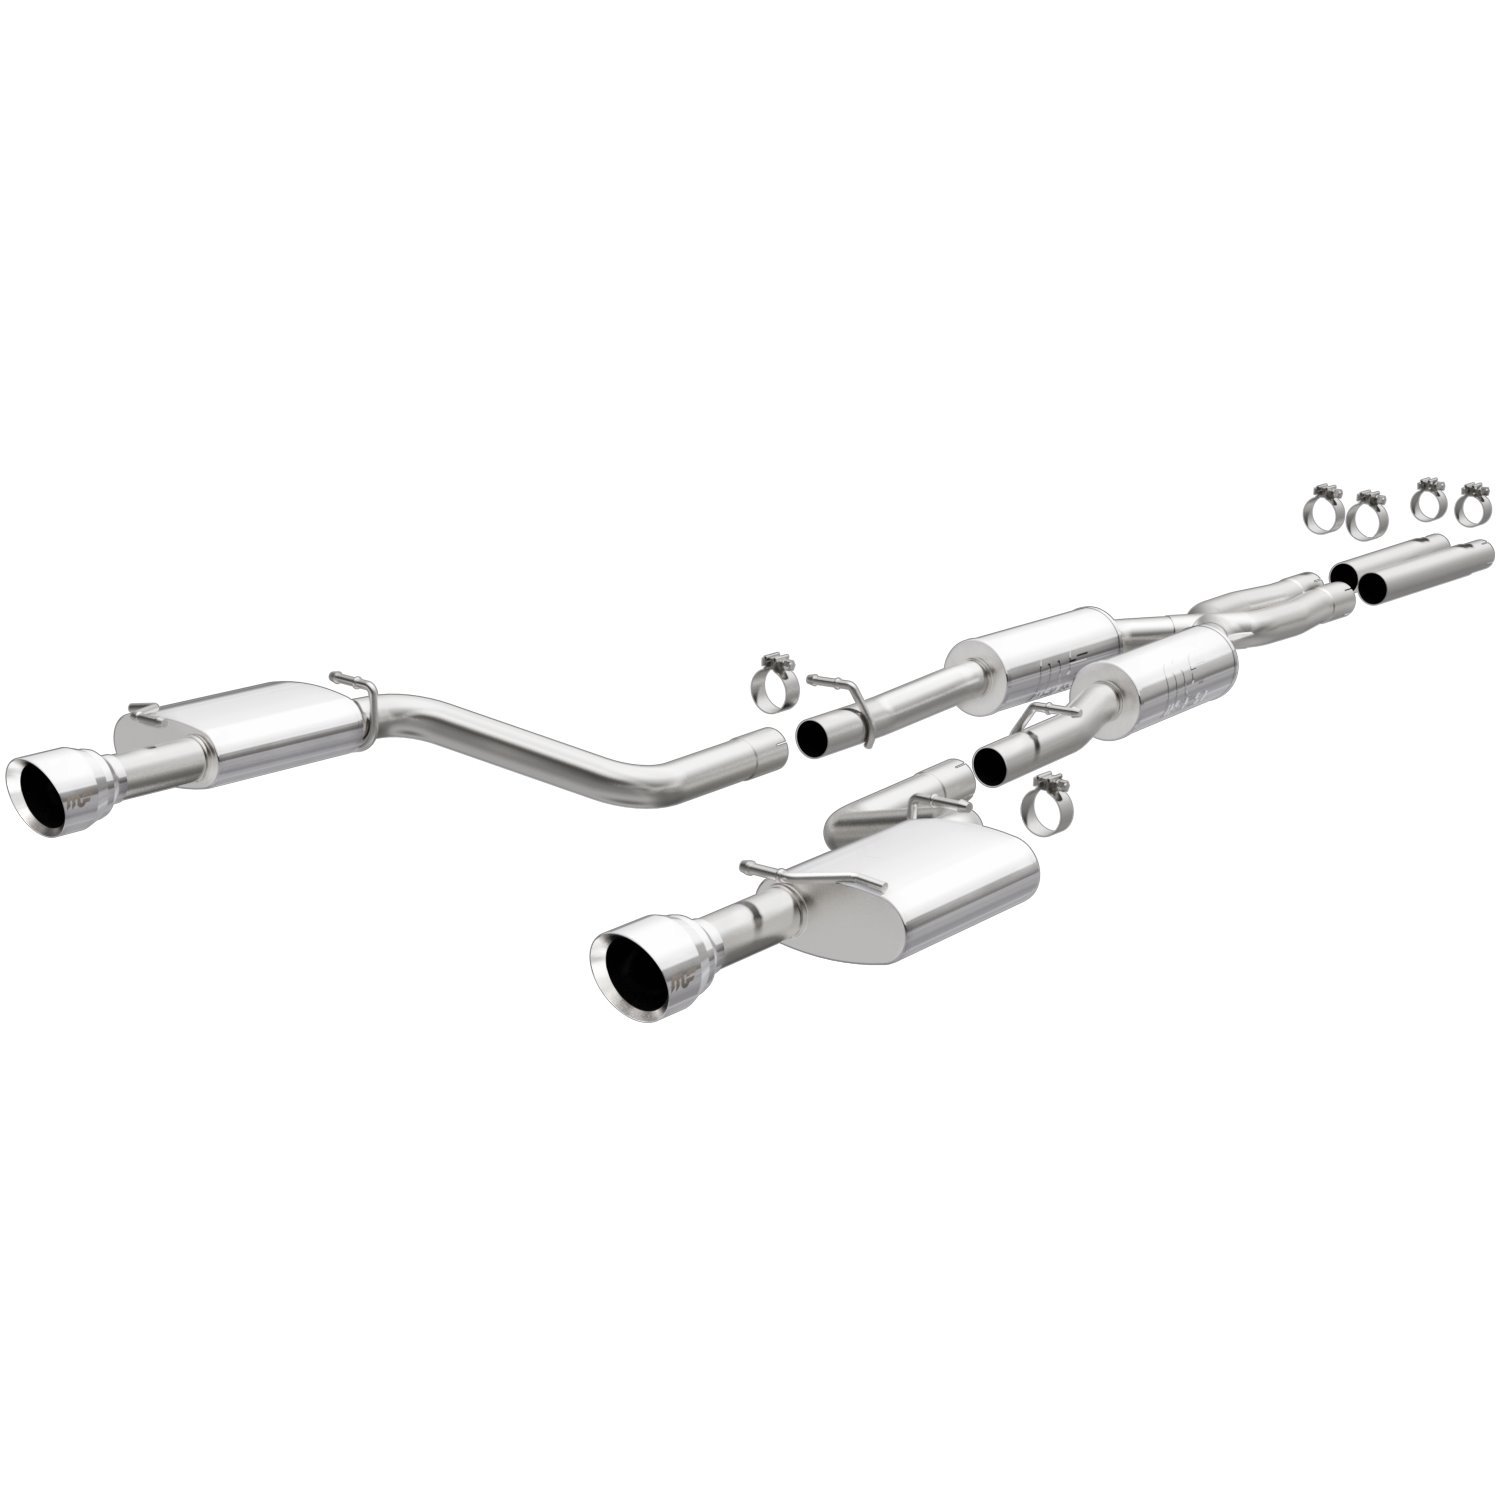 2019-2022 Dodge Charger Street Series Cat-Back Performance Exhaust System